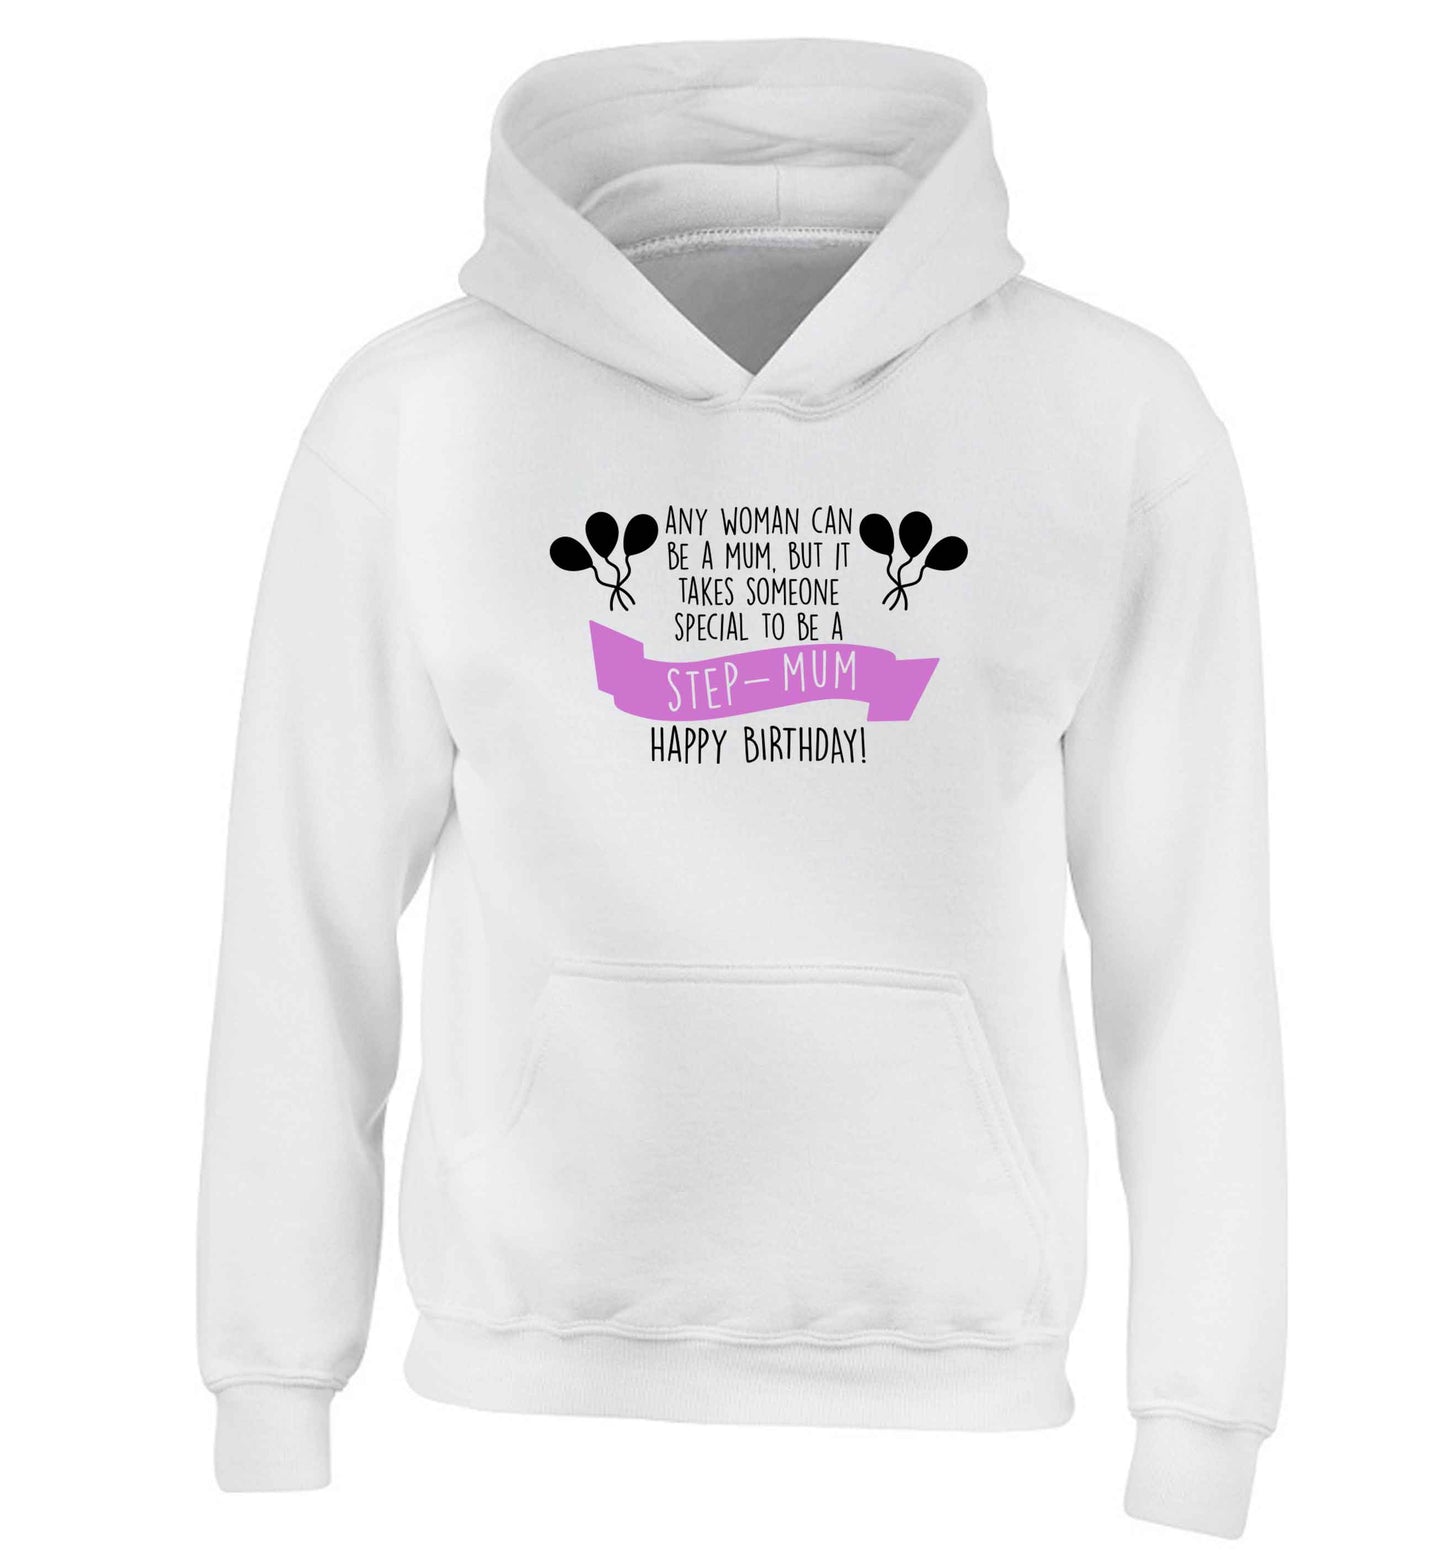 Takes someone special to be a step-mum, happy birthday! children's white hoodie 12-13 Years